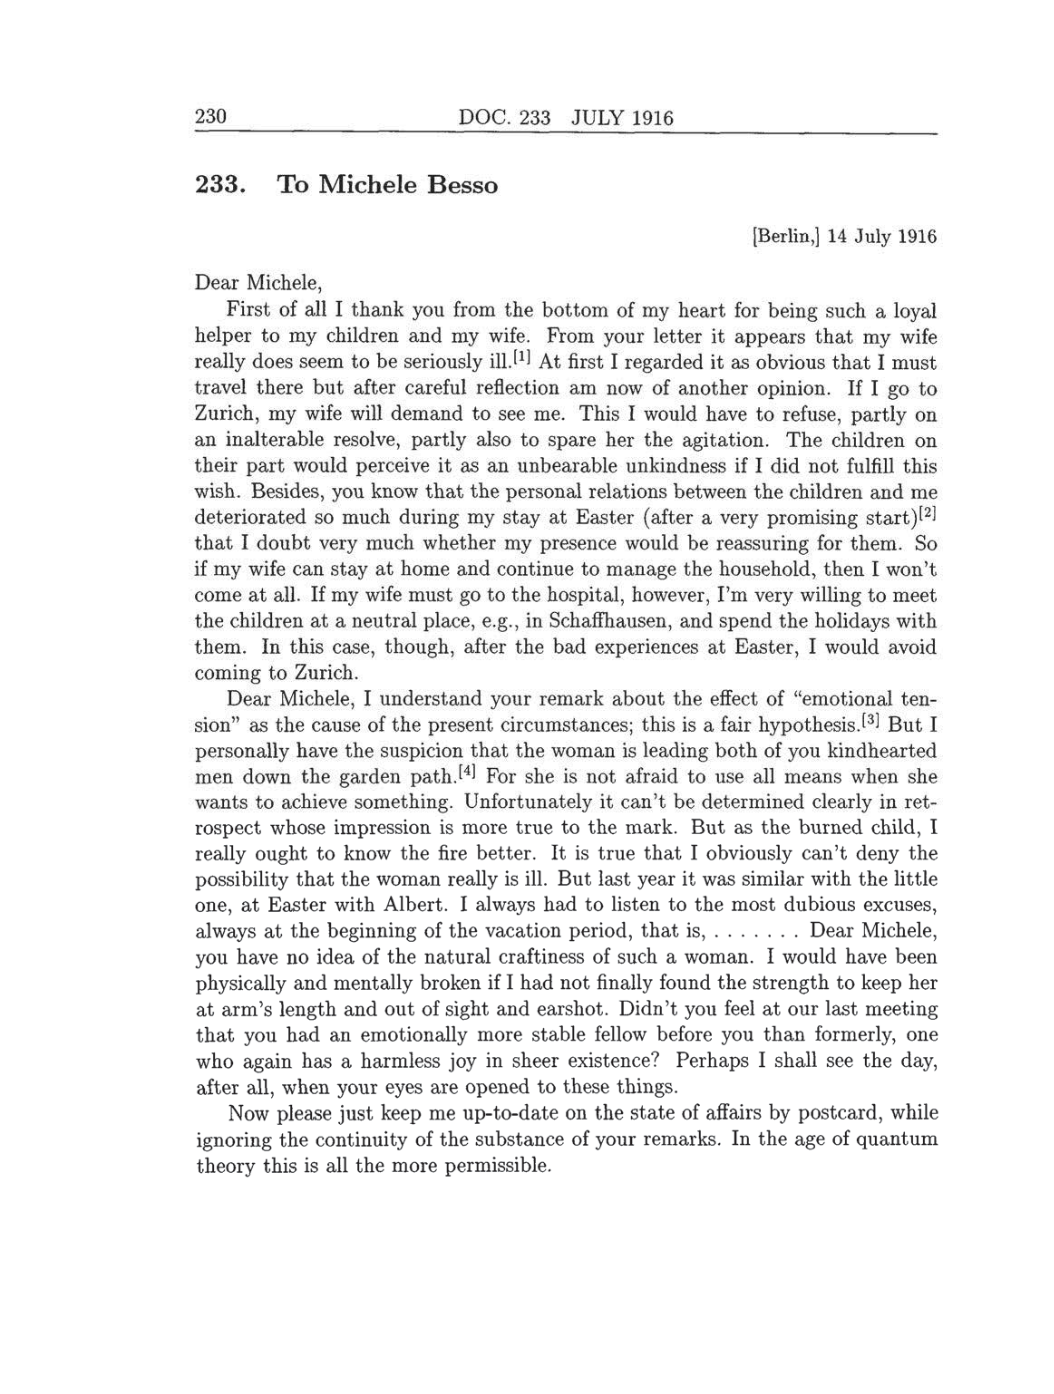 Volume 8: The Berlin Years: Correspondence, 1914-1918 (English translation supplement) page 230